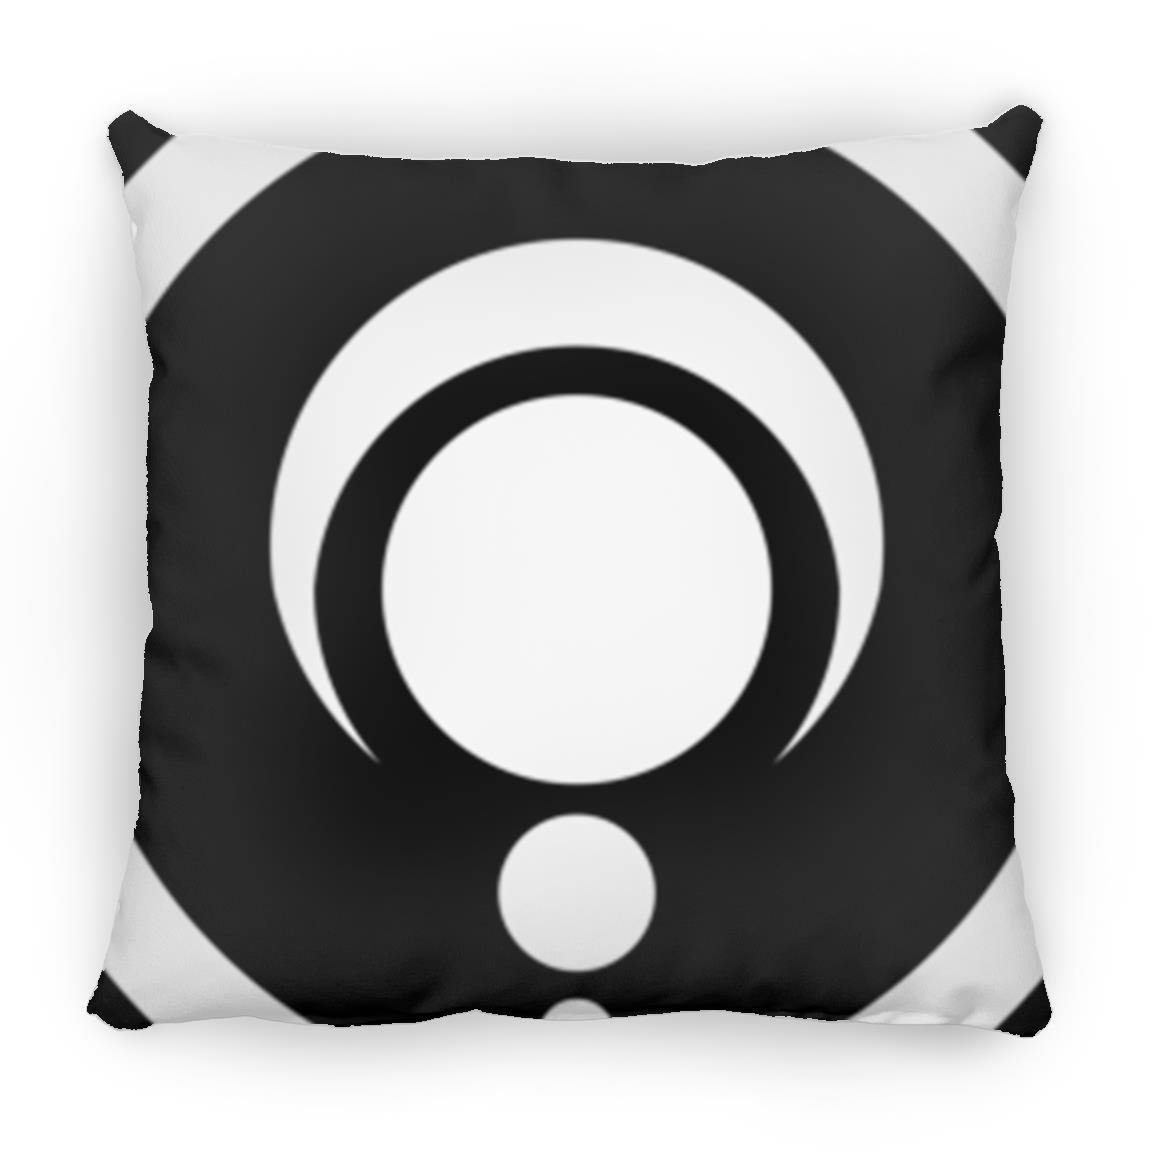 Crop Circle Pillow - Cley Hill 3 - Shapes of Wisdom